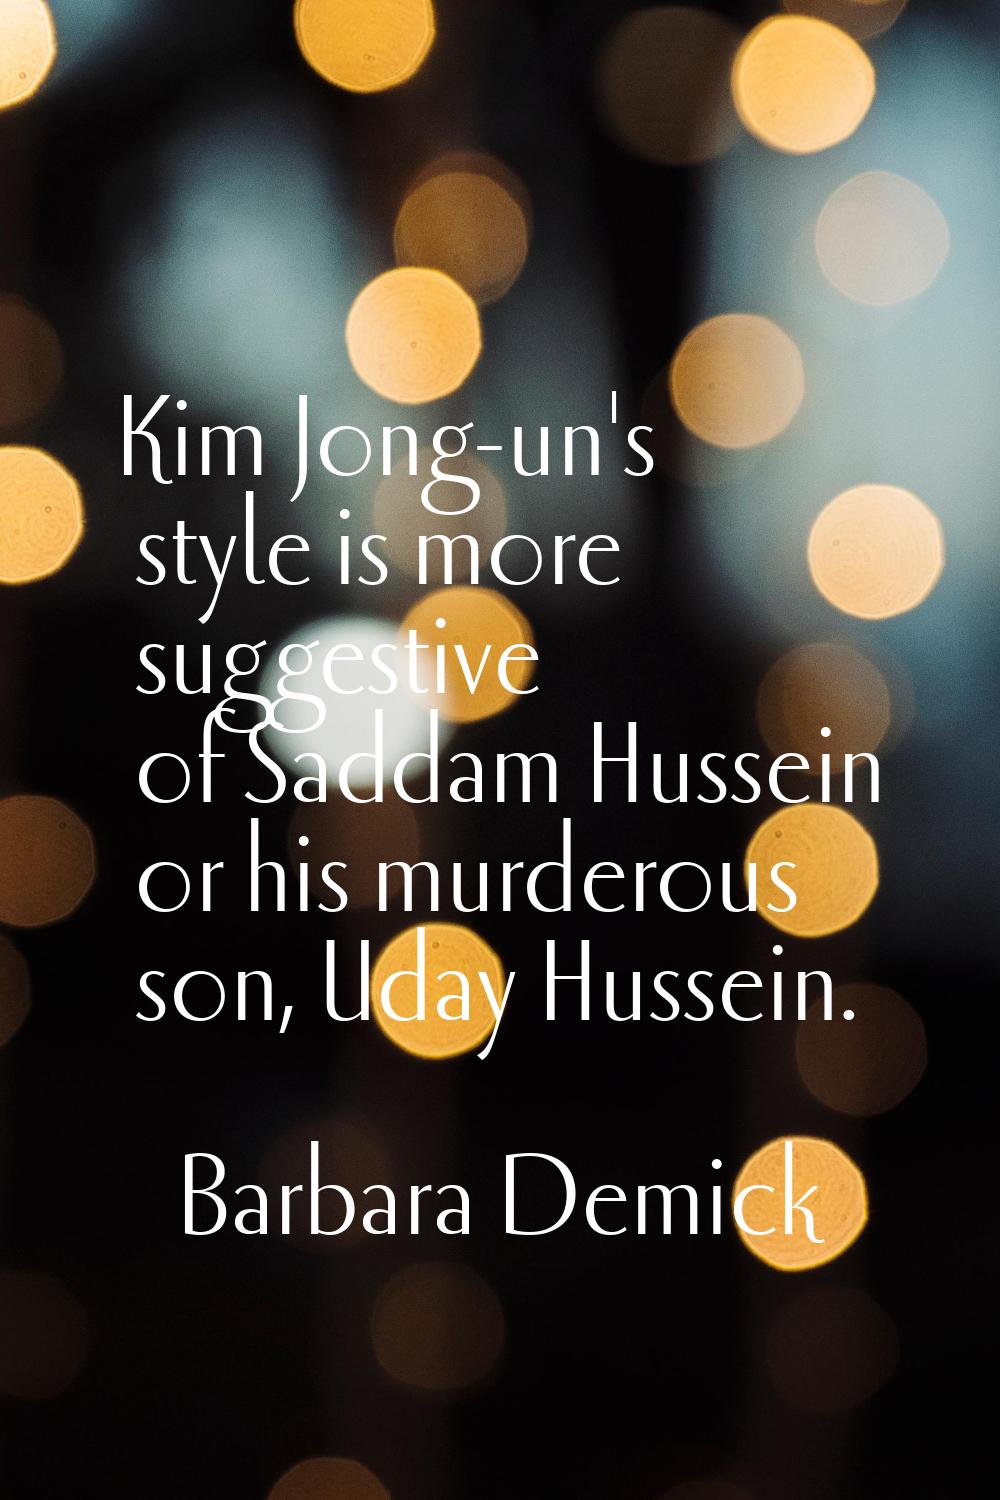 Kim Jong-un's style is more suggestive of Saddam Hussein or his murderous son, Uday Hussein.